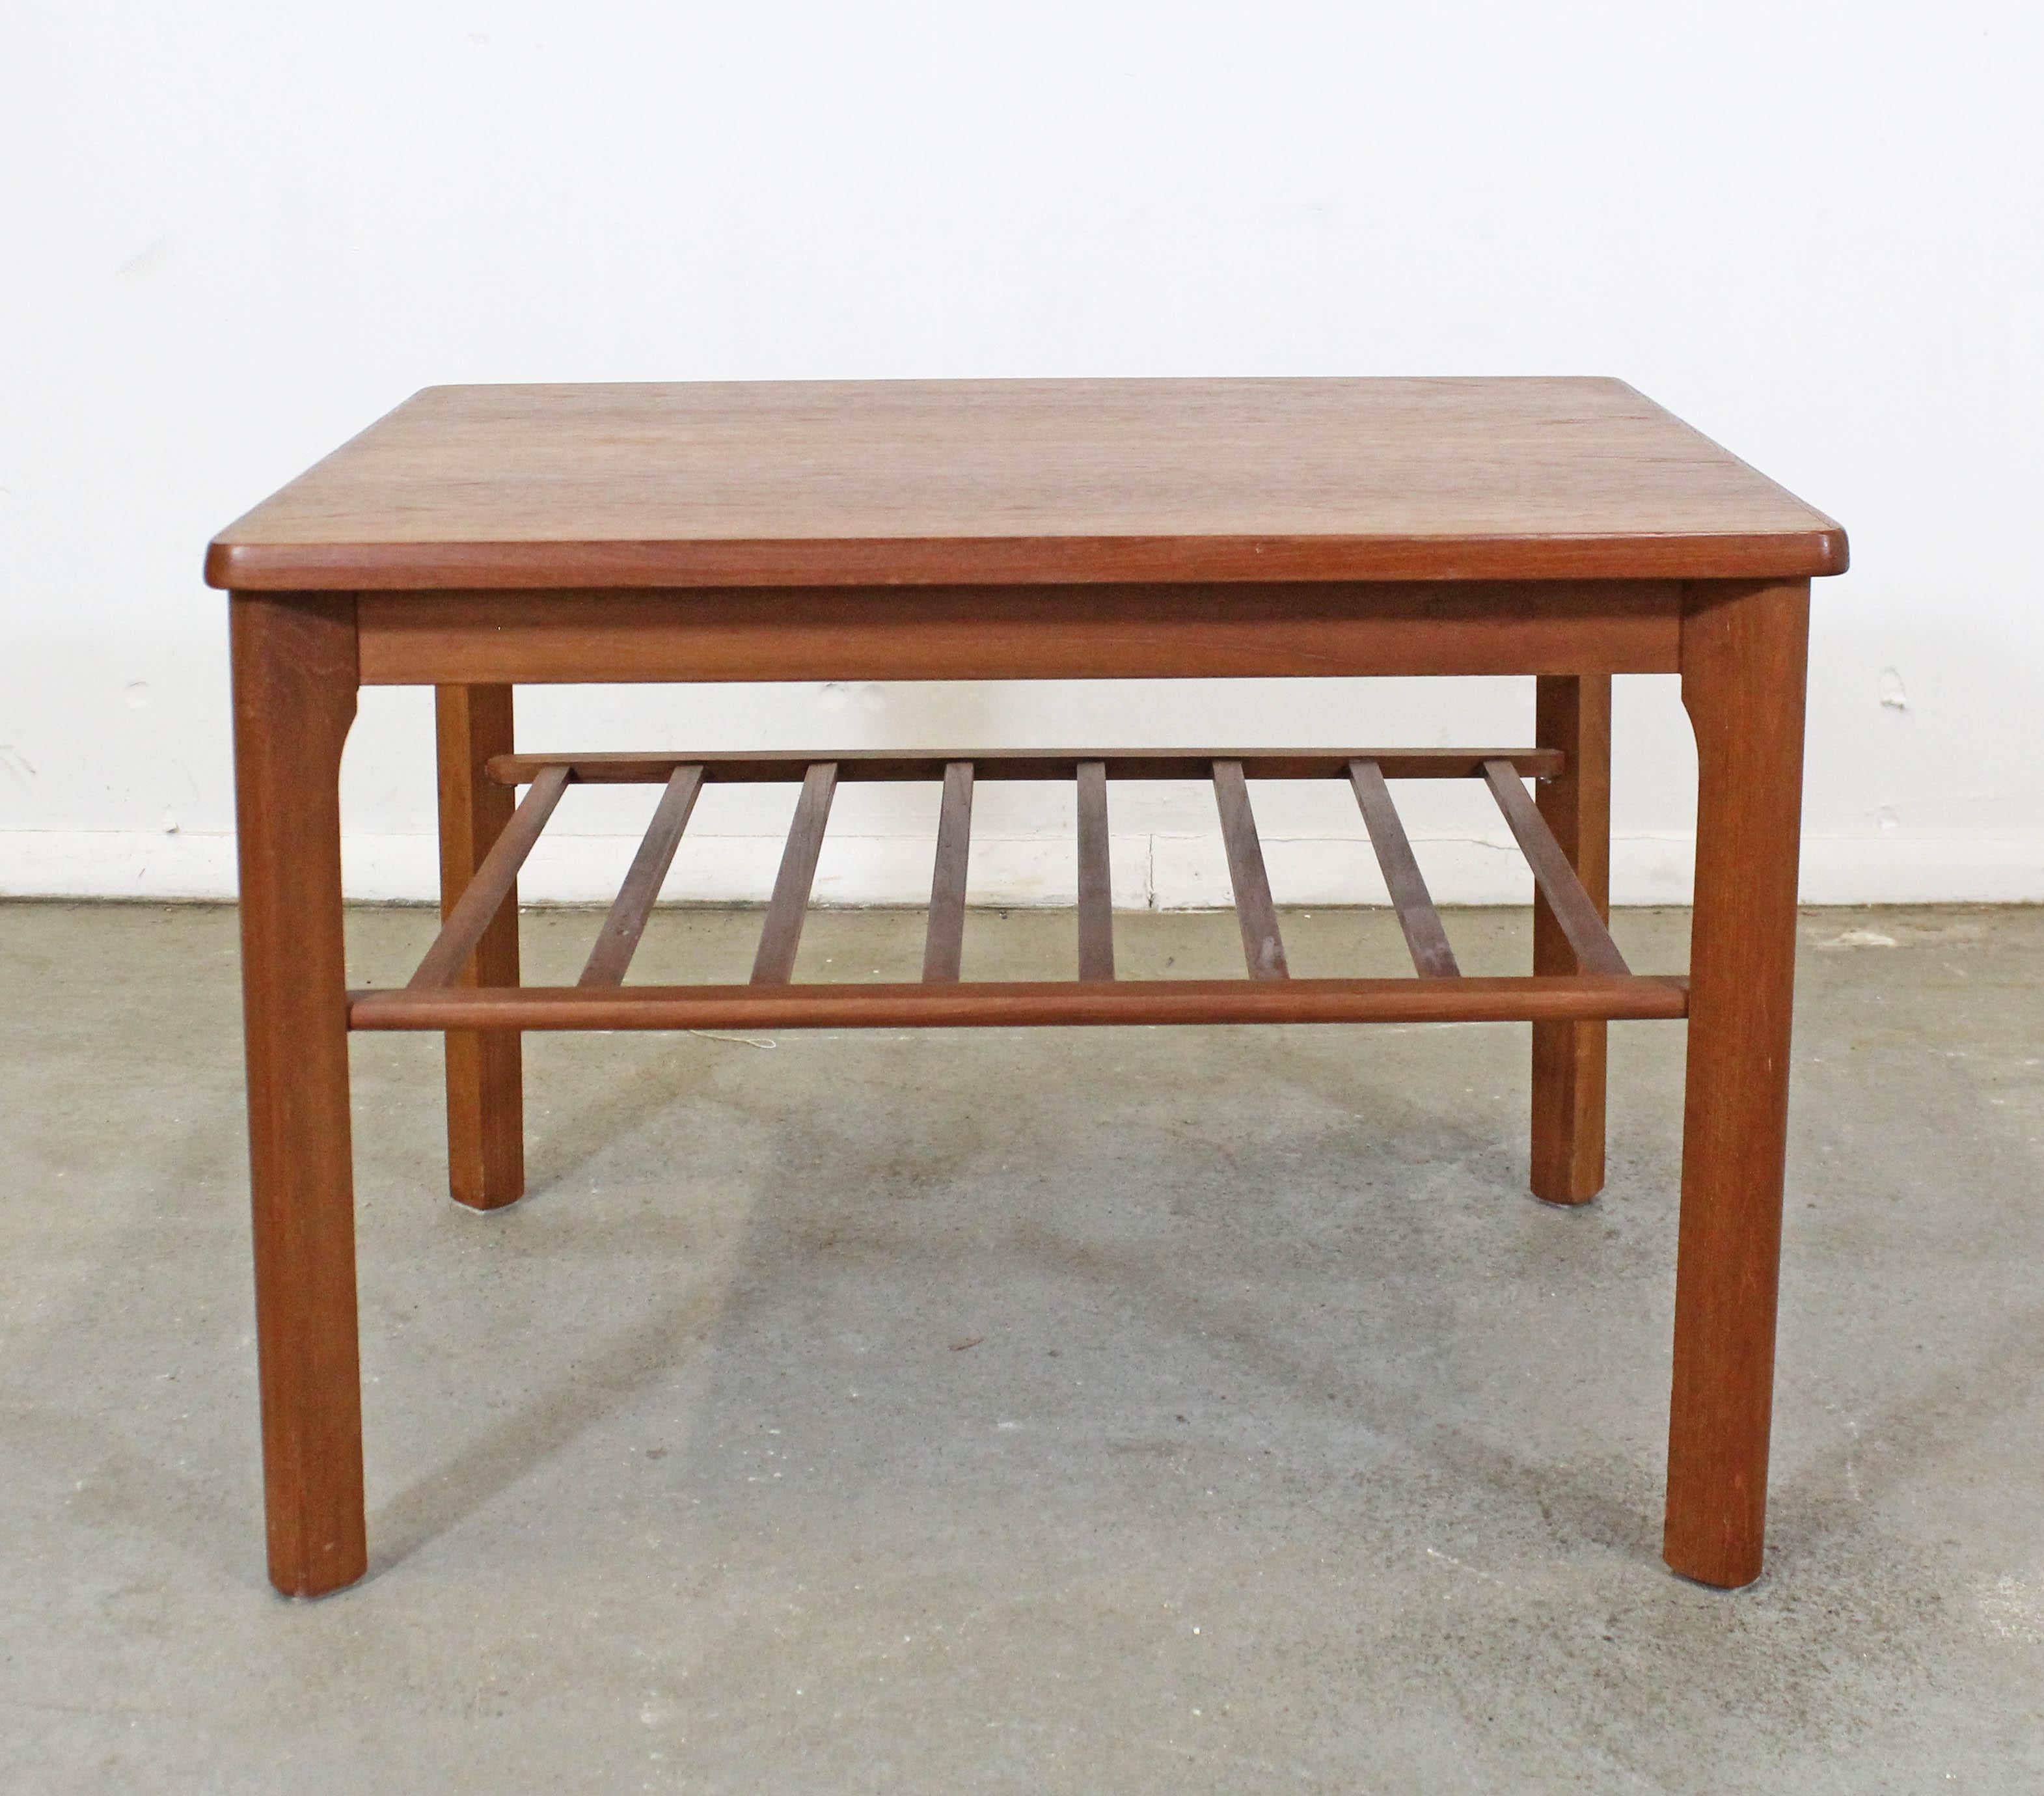 What a find. Offered is a vintage Danish modern end/side table made by Toften Mobelfabrik. It is made of teak and has a bottom rack/shelf. It is in good condition with some age wear including surface scratches and a slight previous repair on the